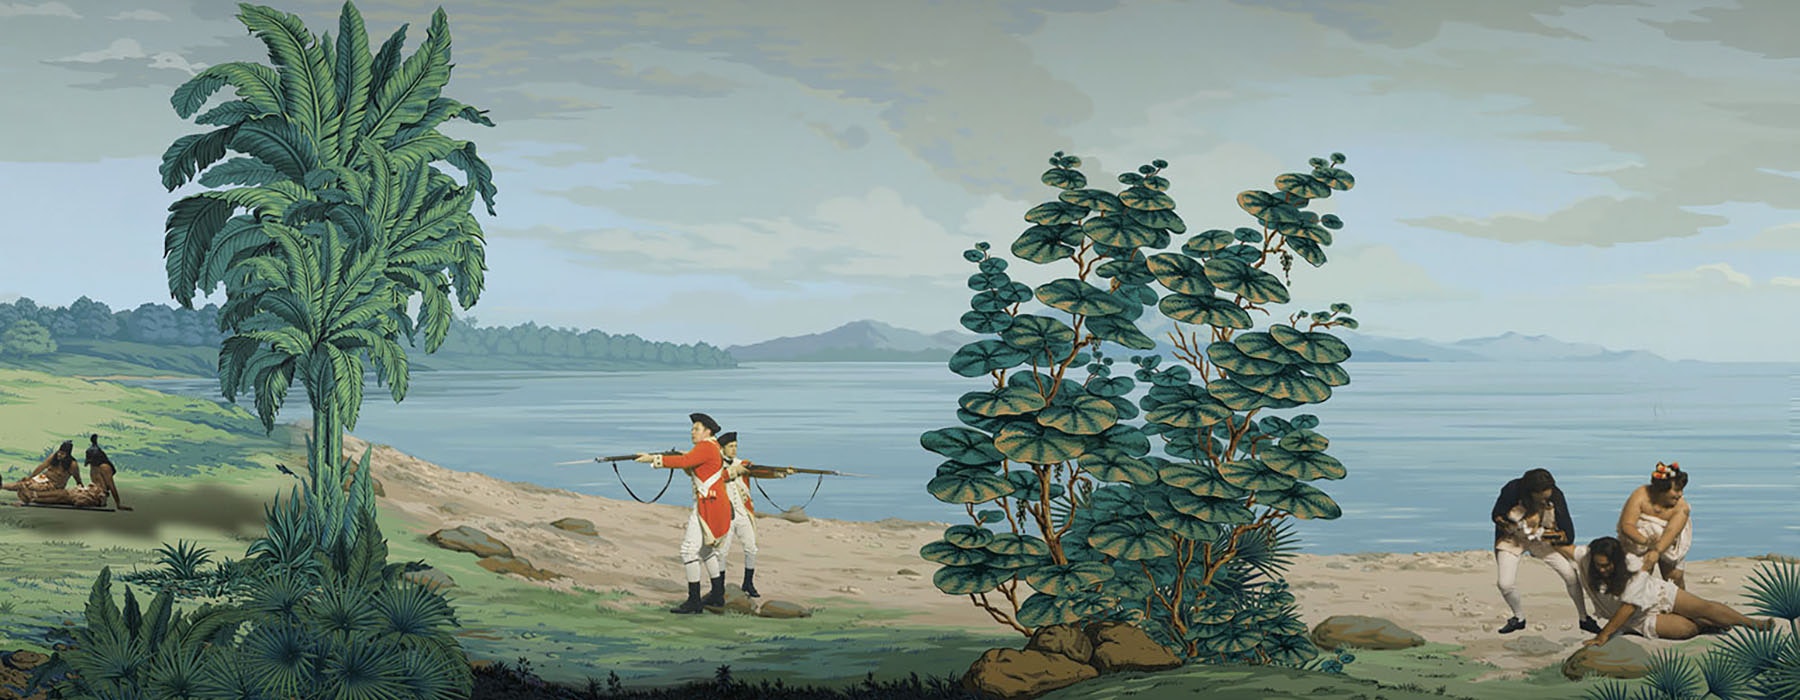 A still from the video artwork in Pursuit of Venus [infected] showing a wide waterside landscape and two British soldiers with their guns drawn